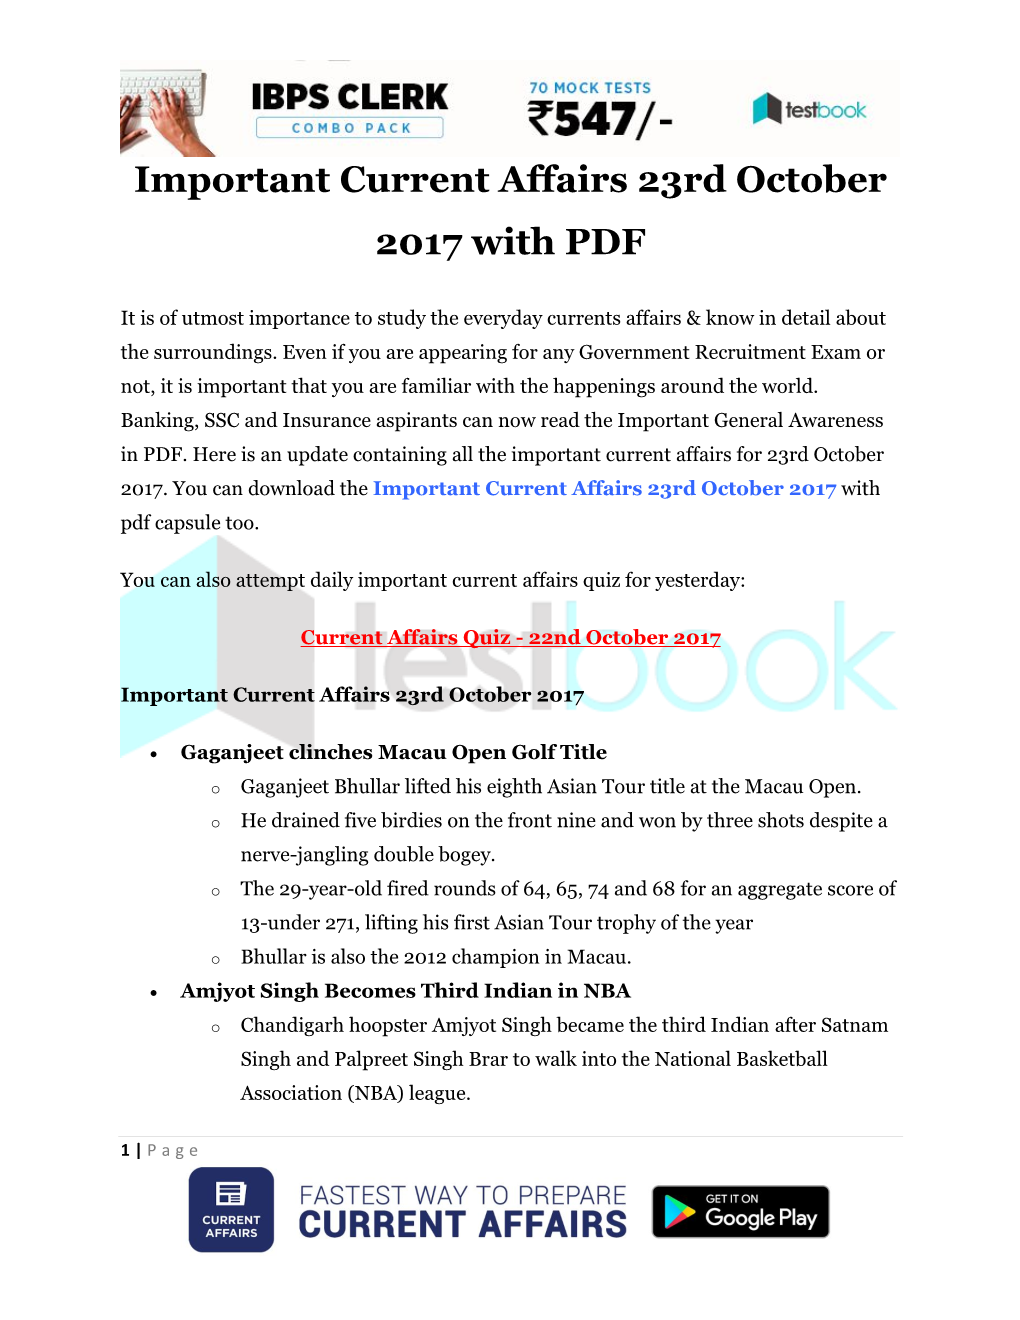 Important Current Affairs 23Rd October 2017 with PDF